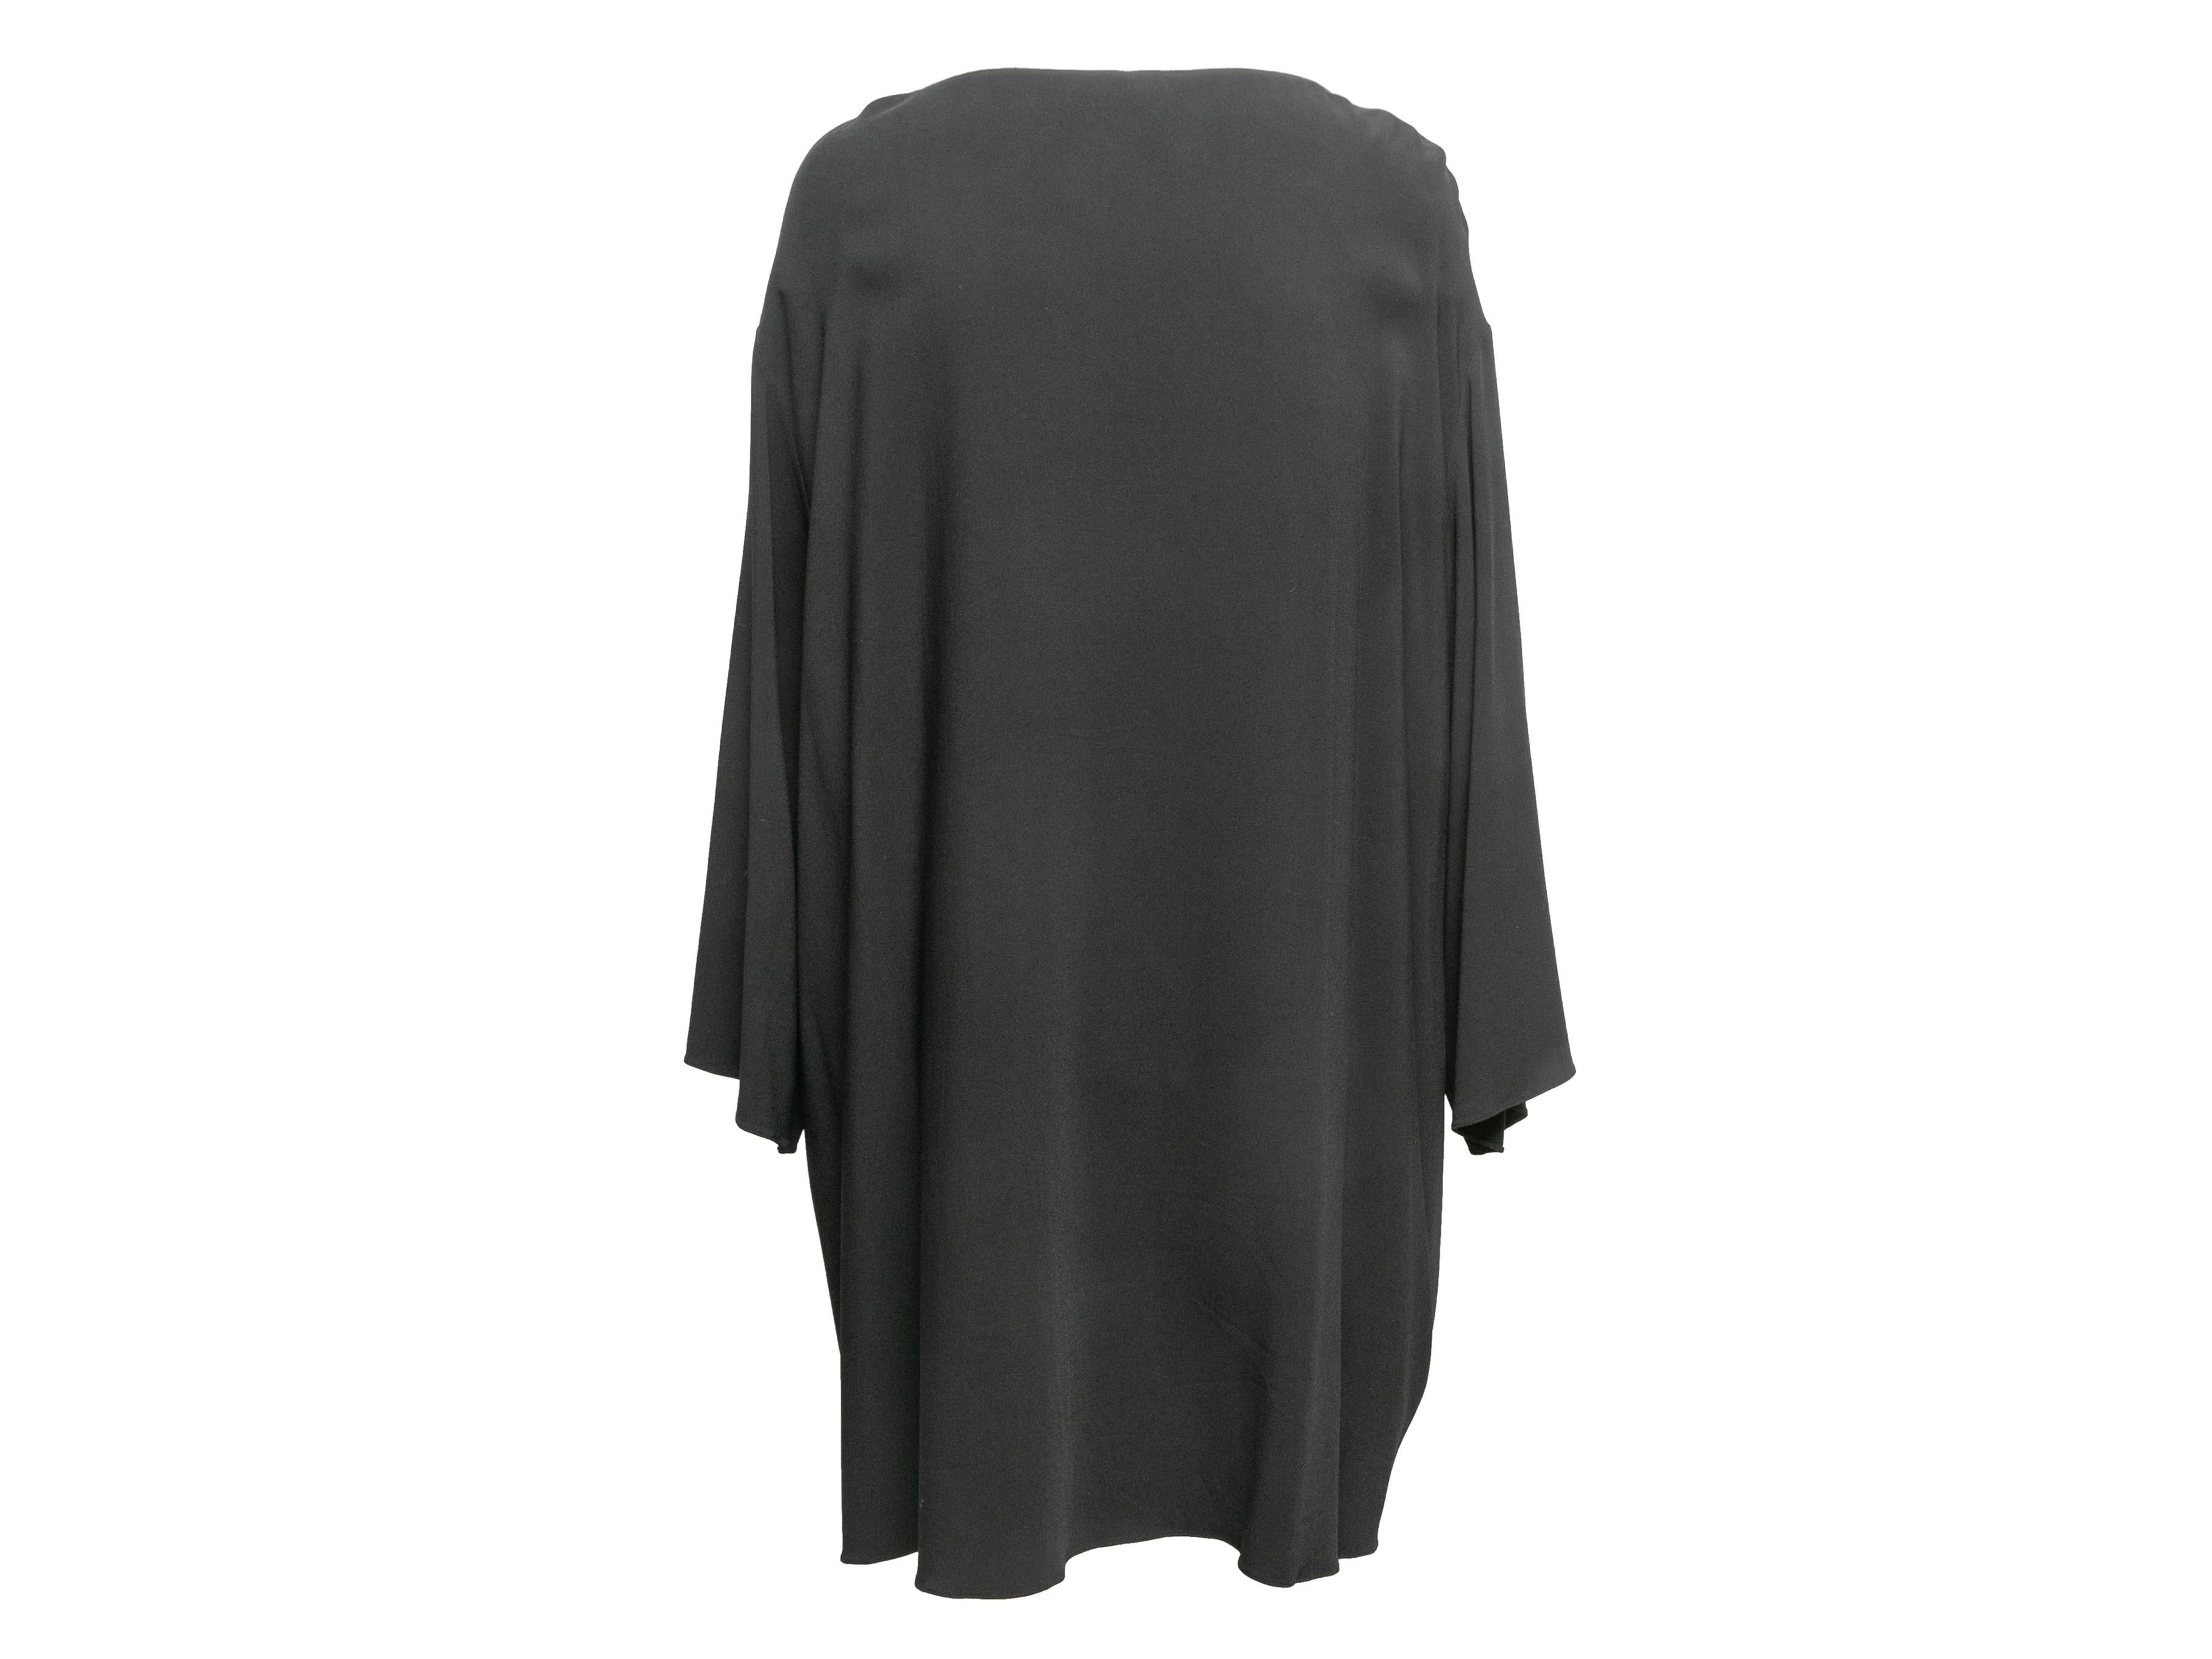 Black bateau neck sweater dress by The Row. Long sleeves. 54